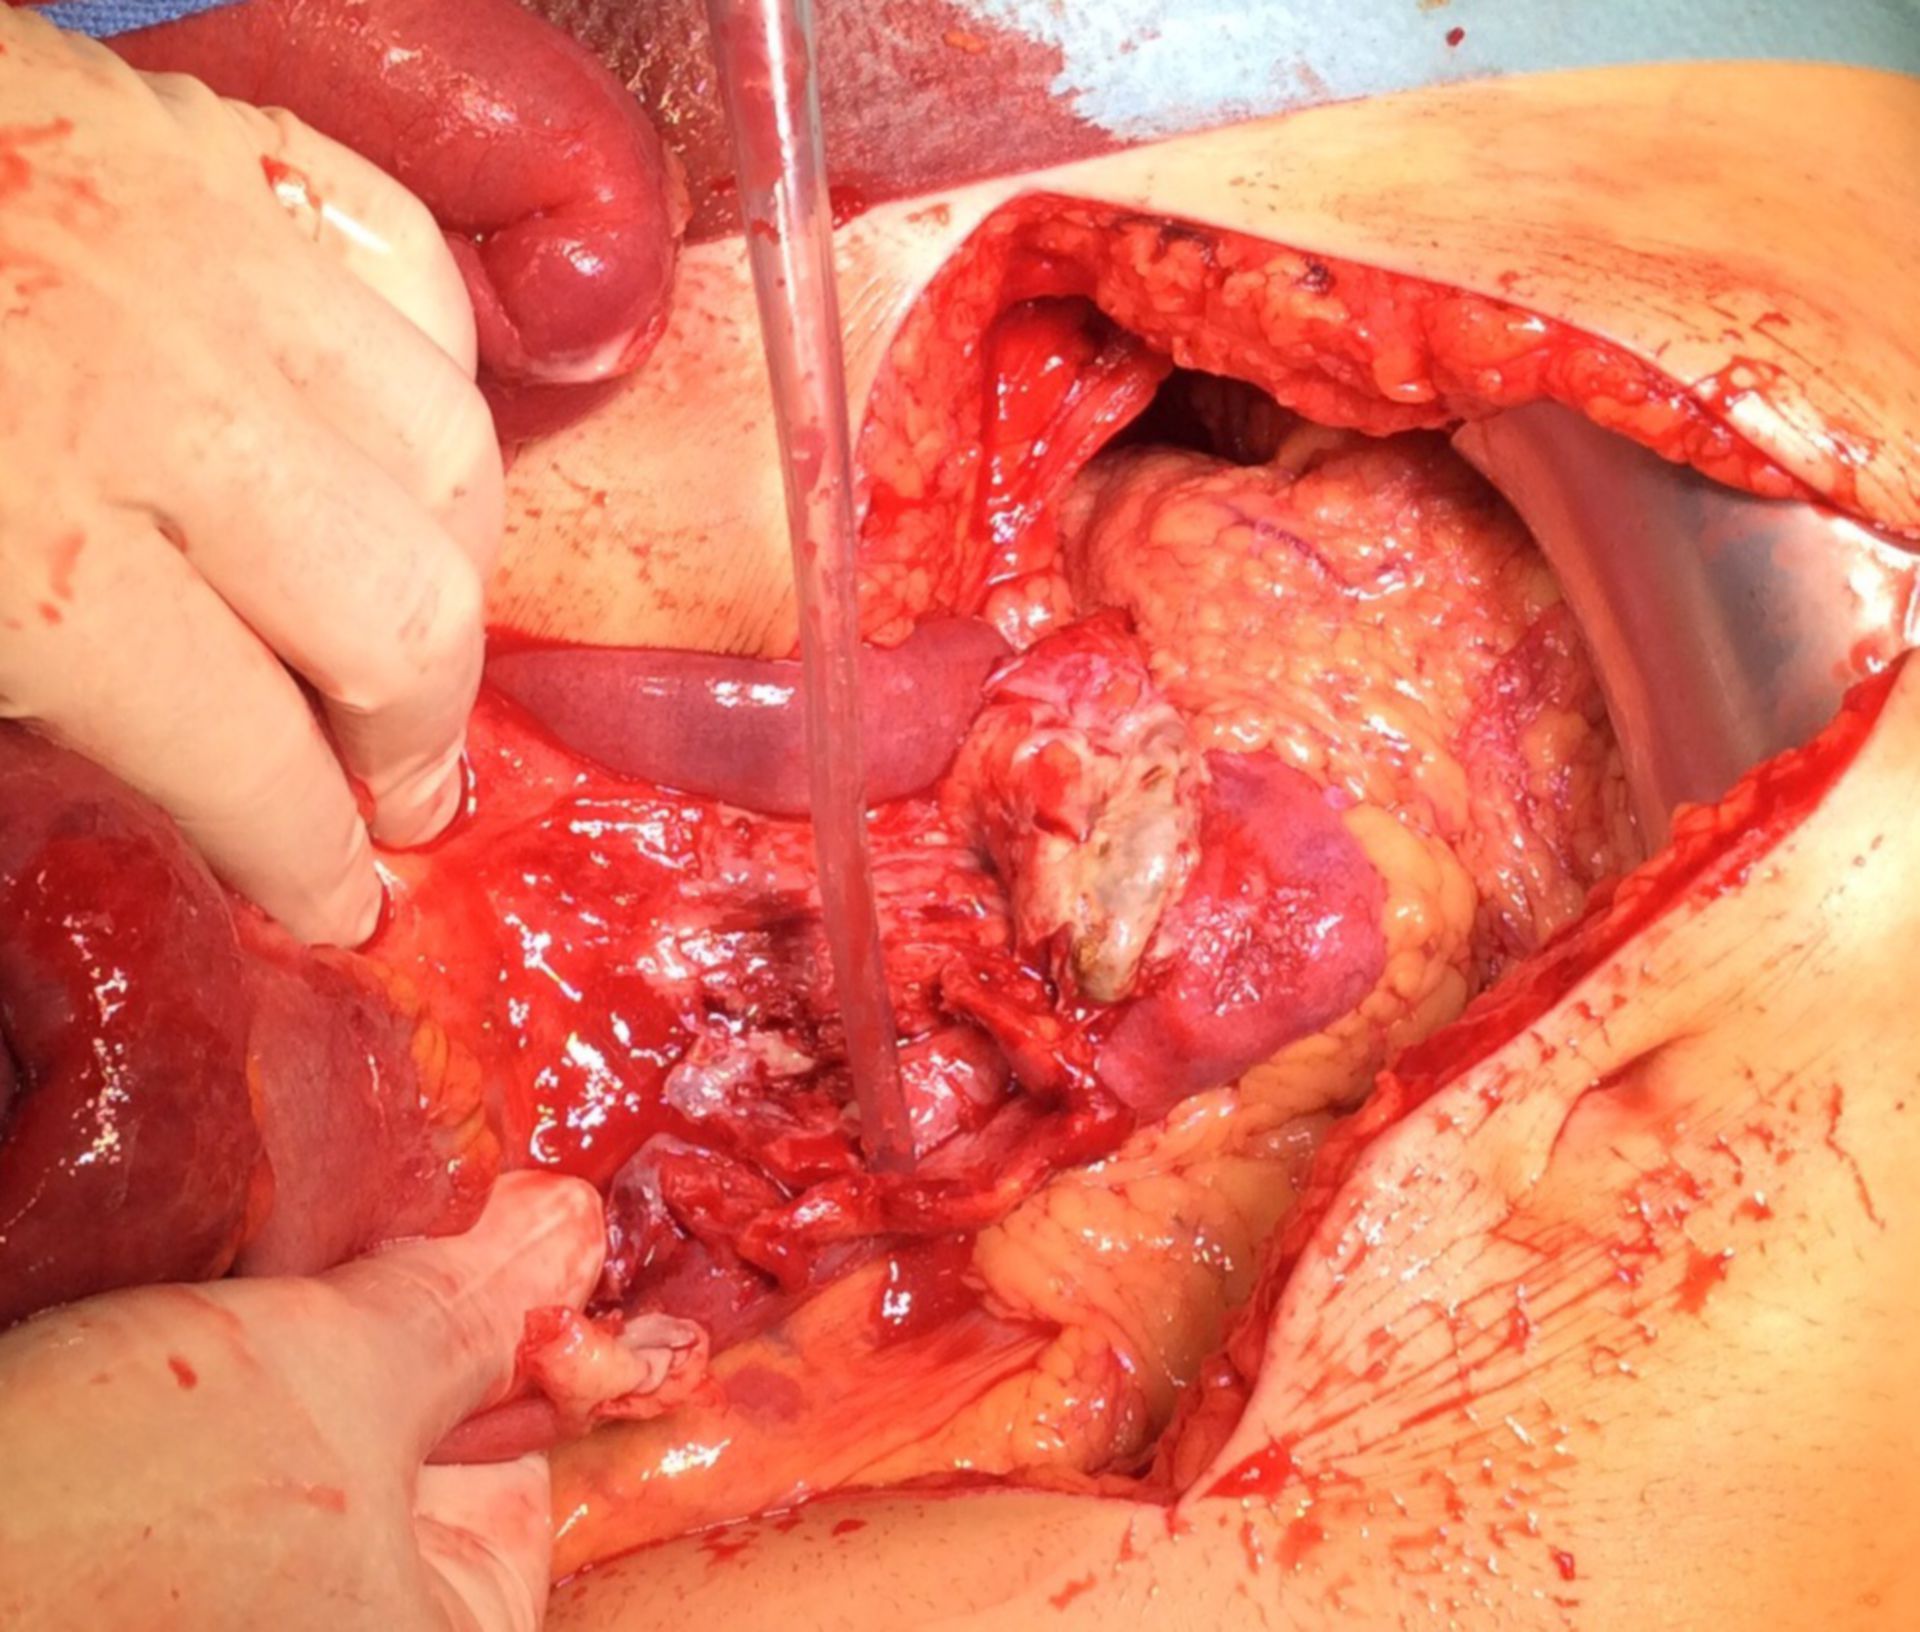 Perforated appendicitis with abscess